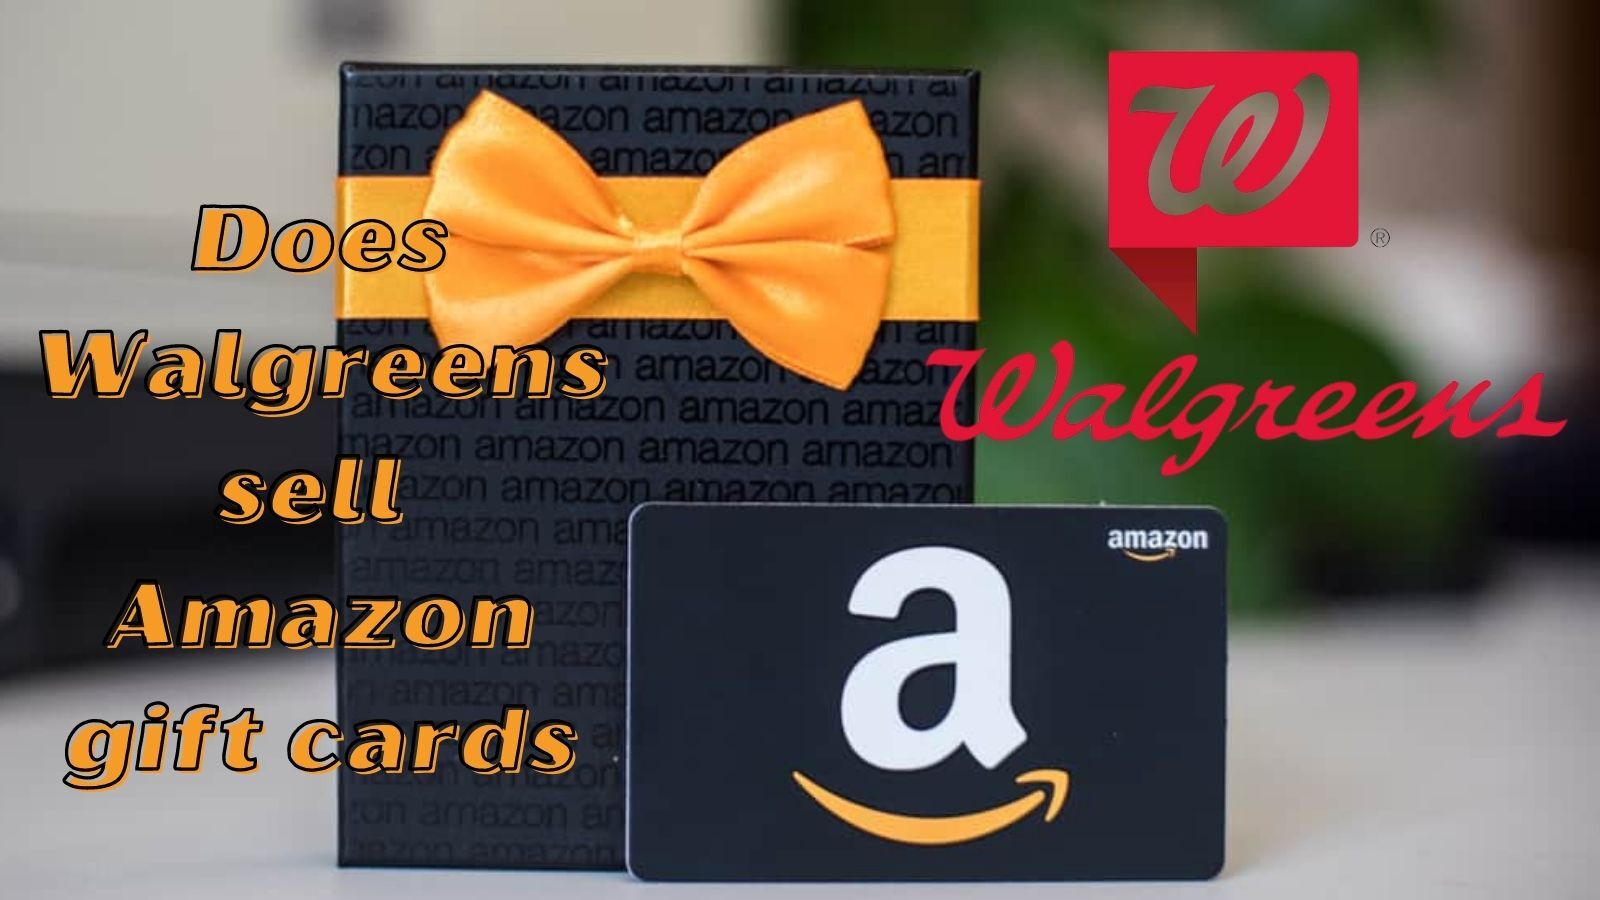 Does Walgreens Sell Amazon Gift Cards in 2022?